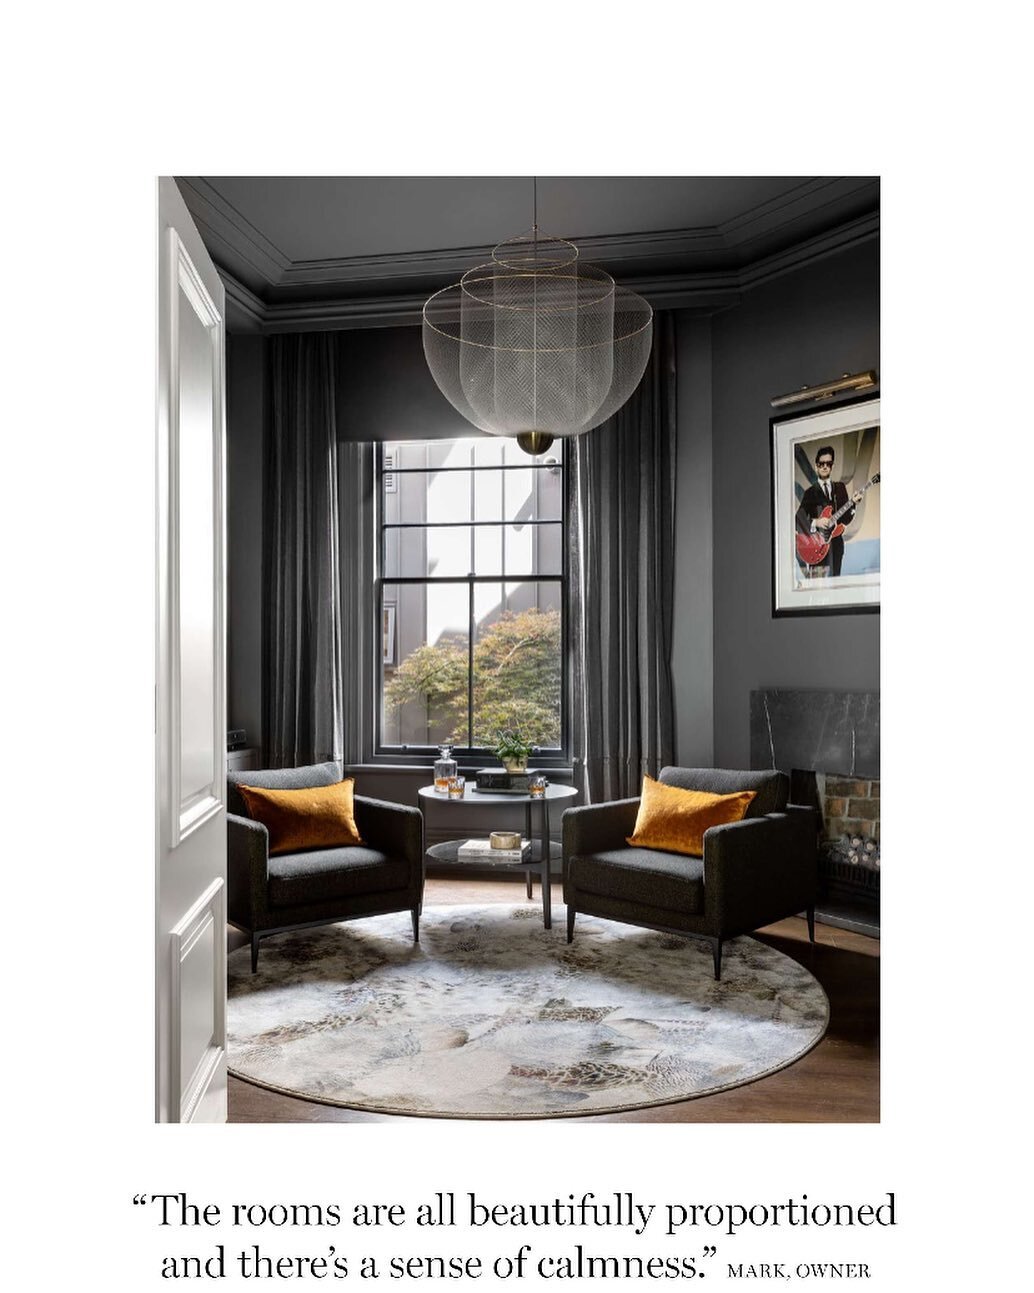 Have a read of the latest House &amp; Garden over the weekend featuring this stunning Eaglemont residence. The music room is such a vibe!
We introduced this spectacular pendant and rug by @spacefurniture, brass picture light by @montauklightingco, ve